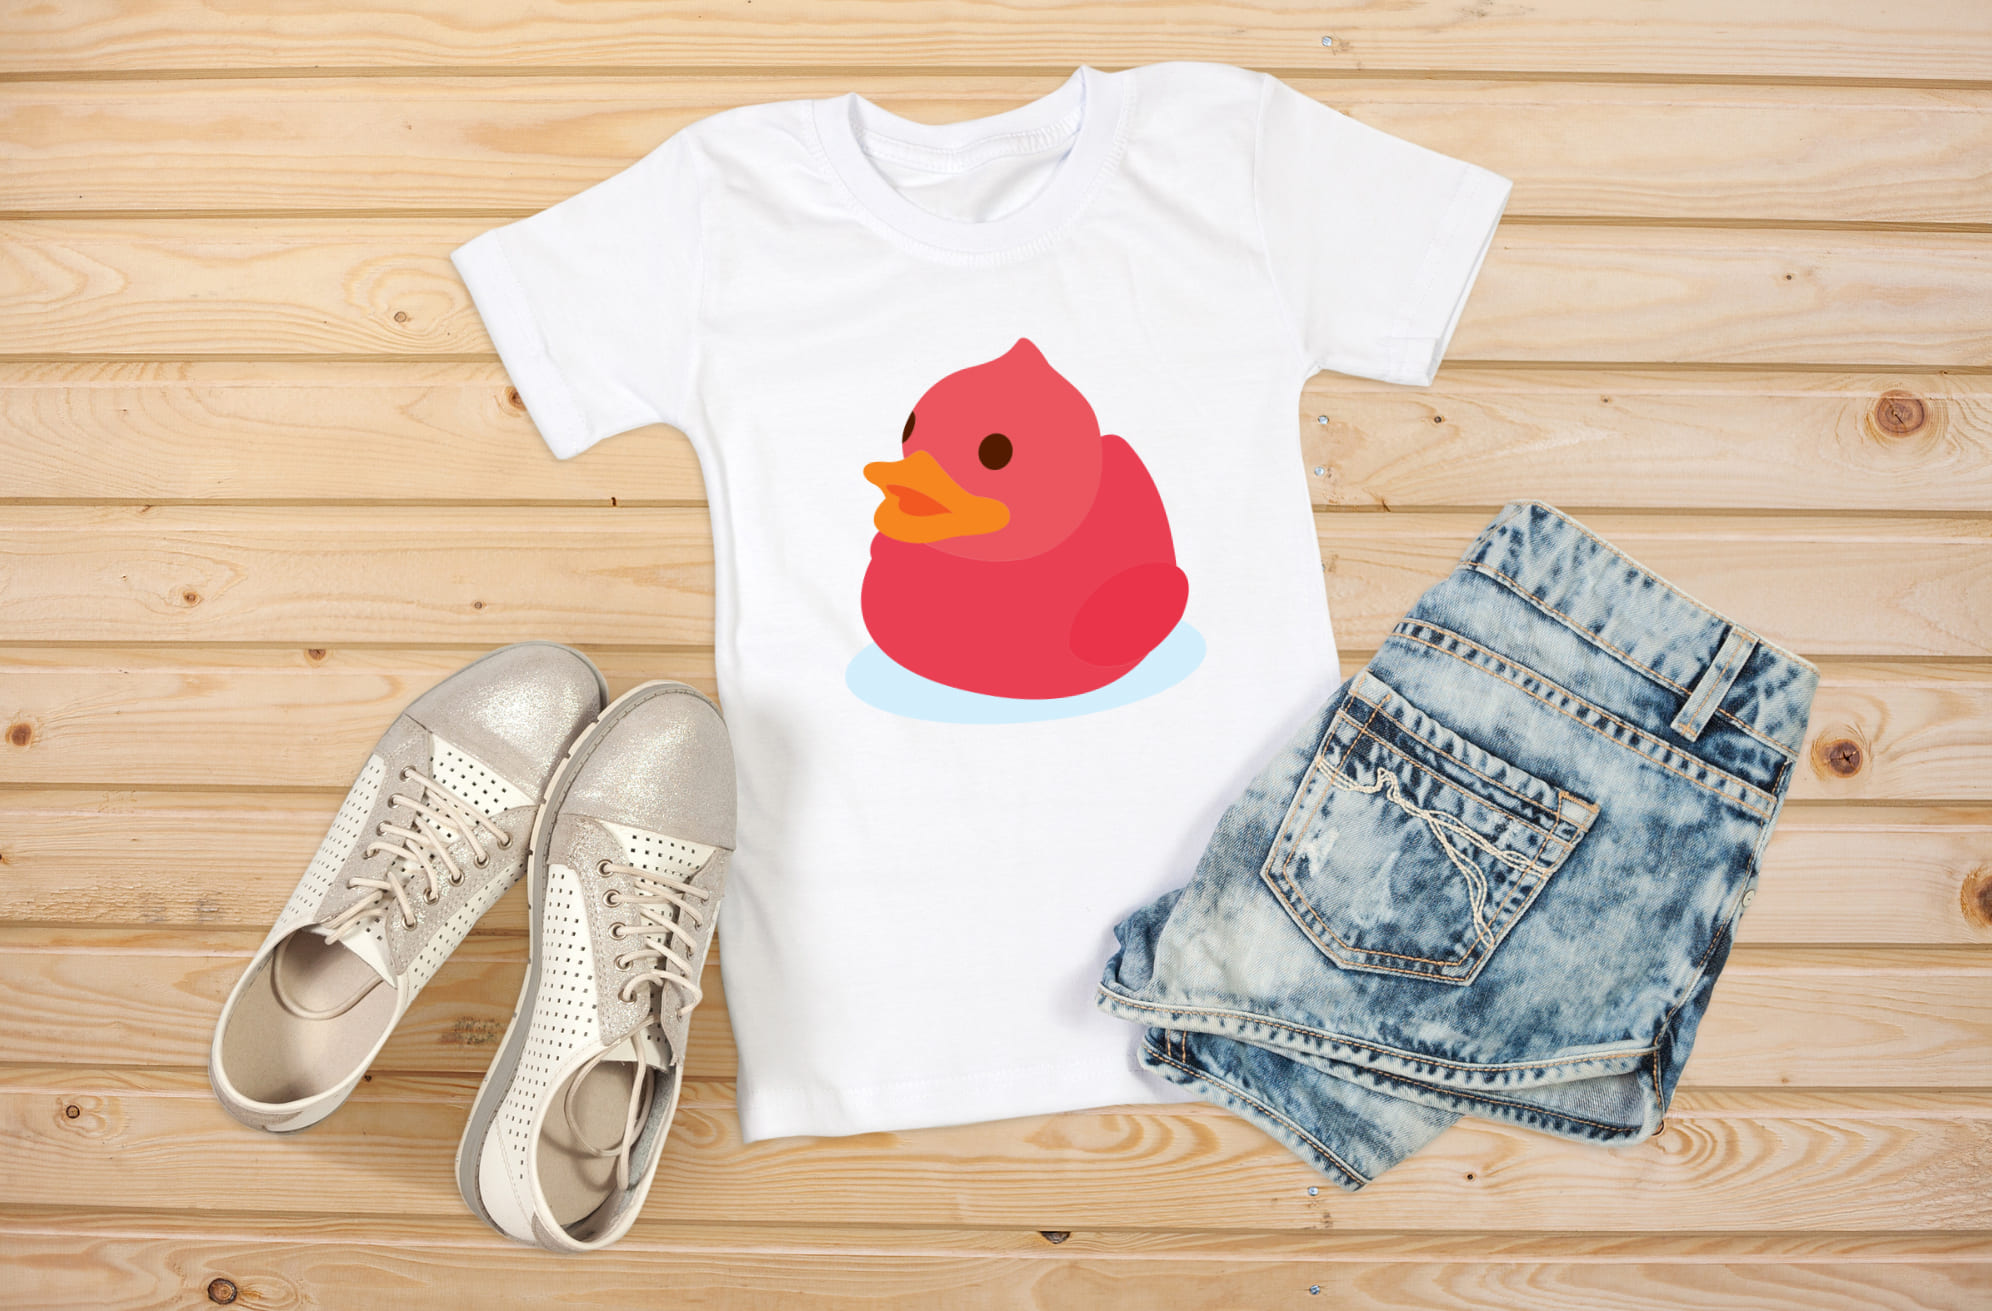 Image of a white t-shirt with an irresistible red rubber duck print.